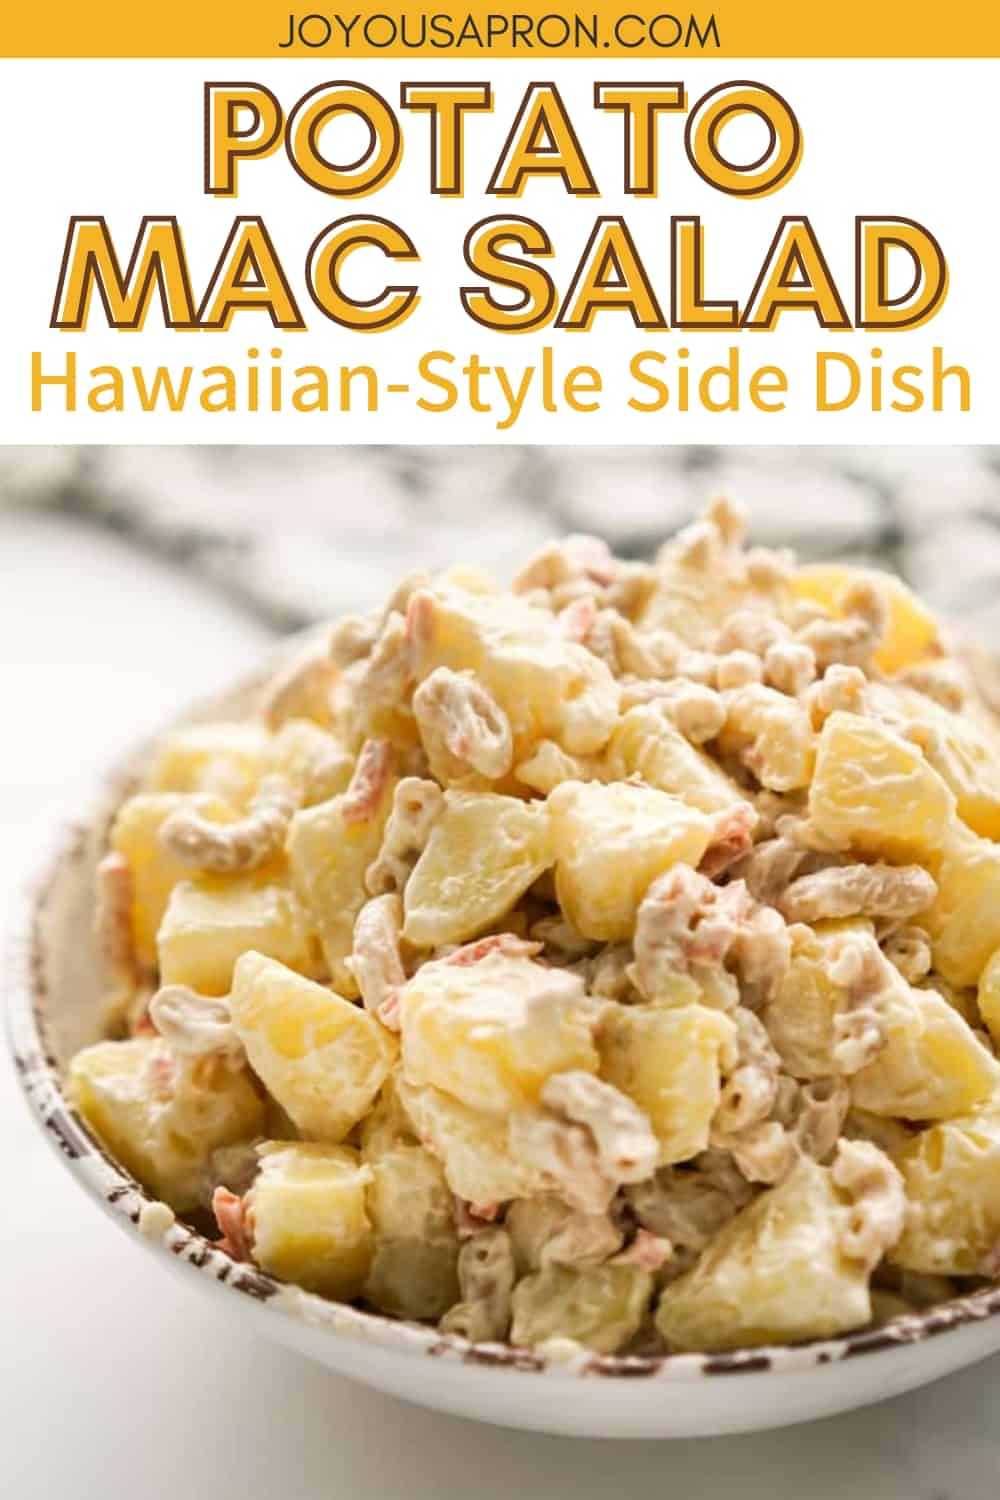 Potato Mac Salad - Hawaiian style potato and mac salad features soft diced potatoes, macaroni, chopped carrots and grated sweet onions tossed in creamy and tangy dressing. via @joyousapron